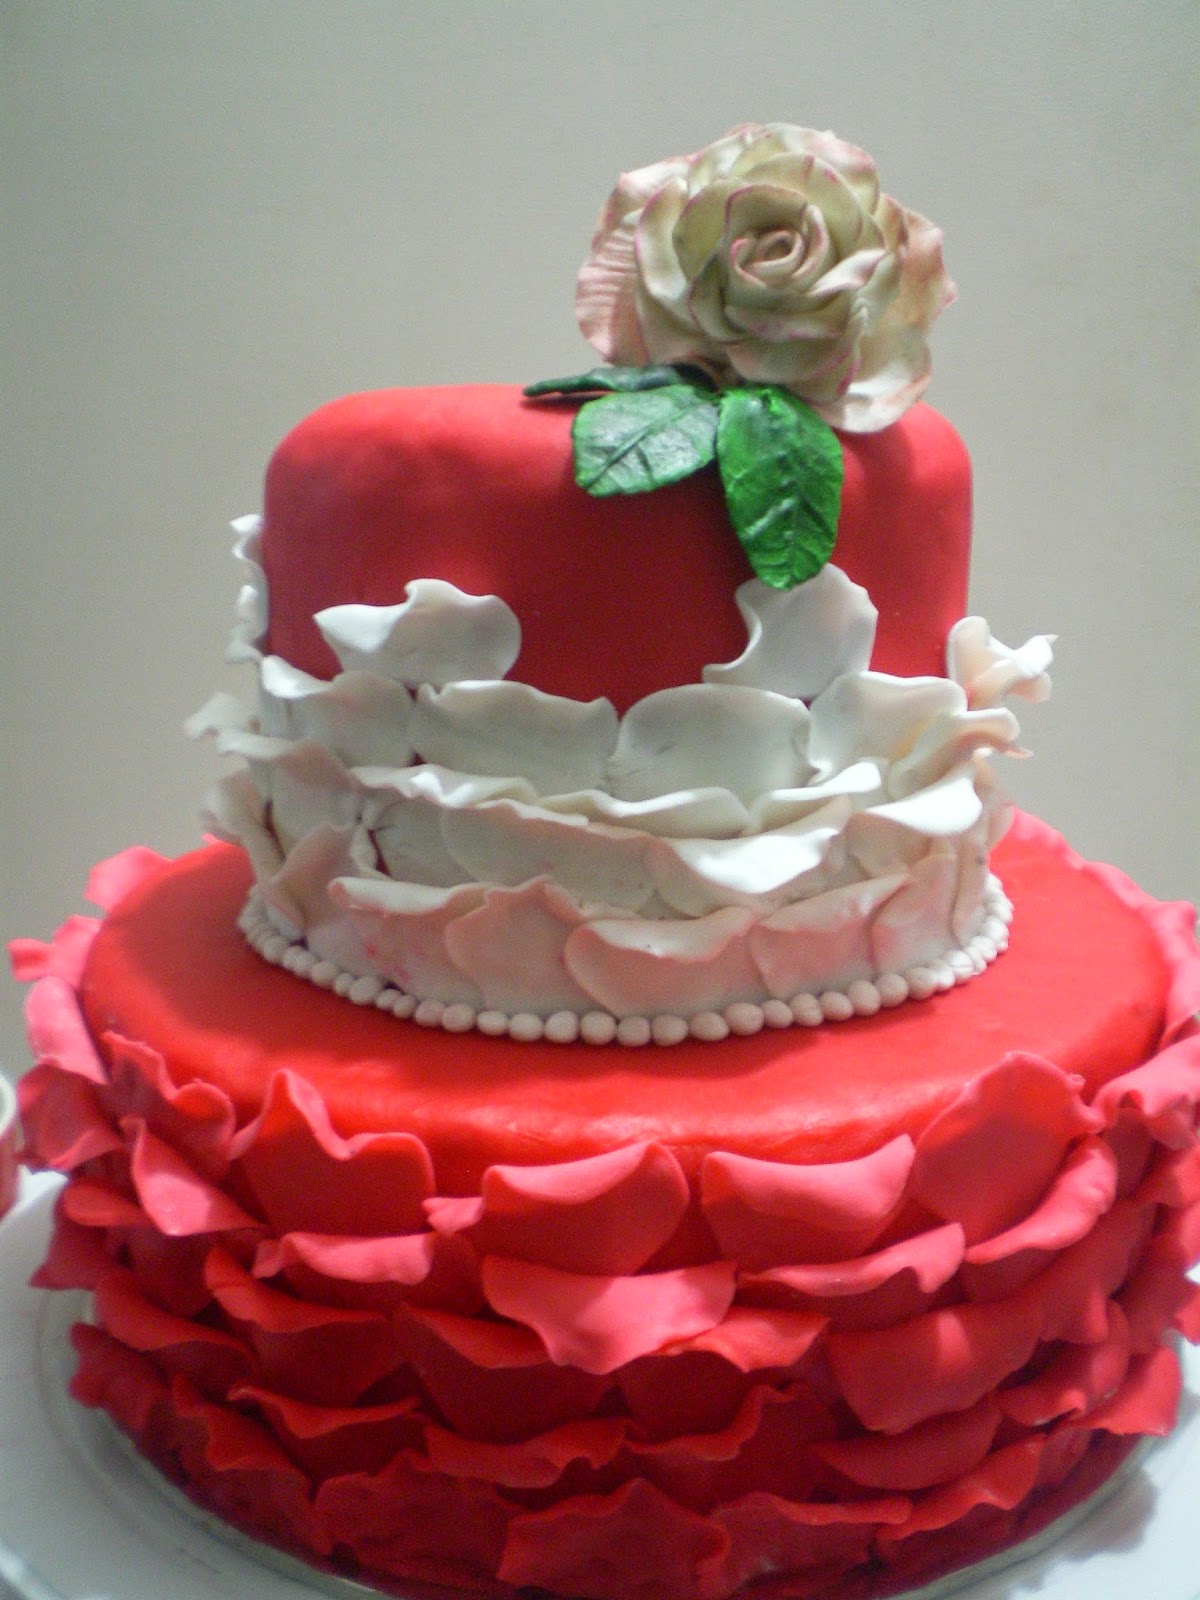 Stacking Tiered Fondant Cakes